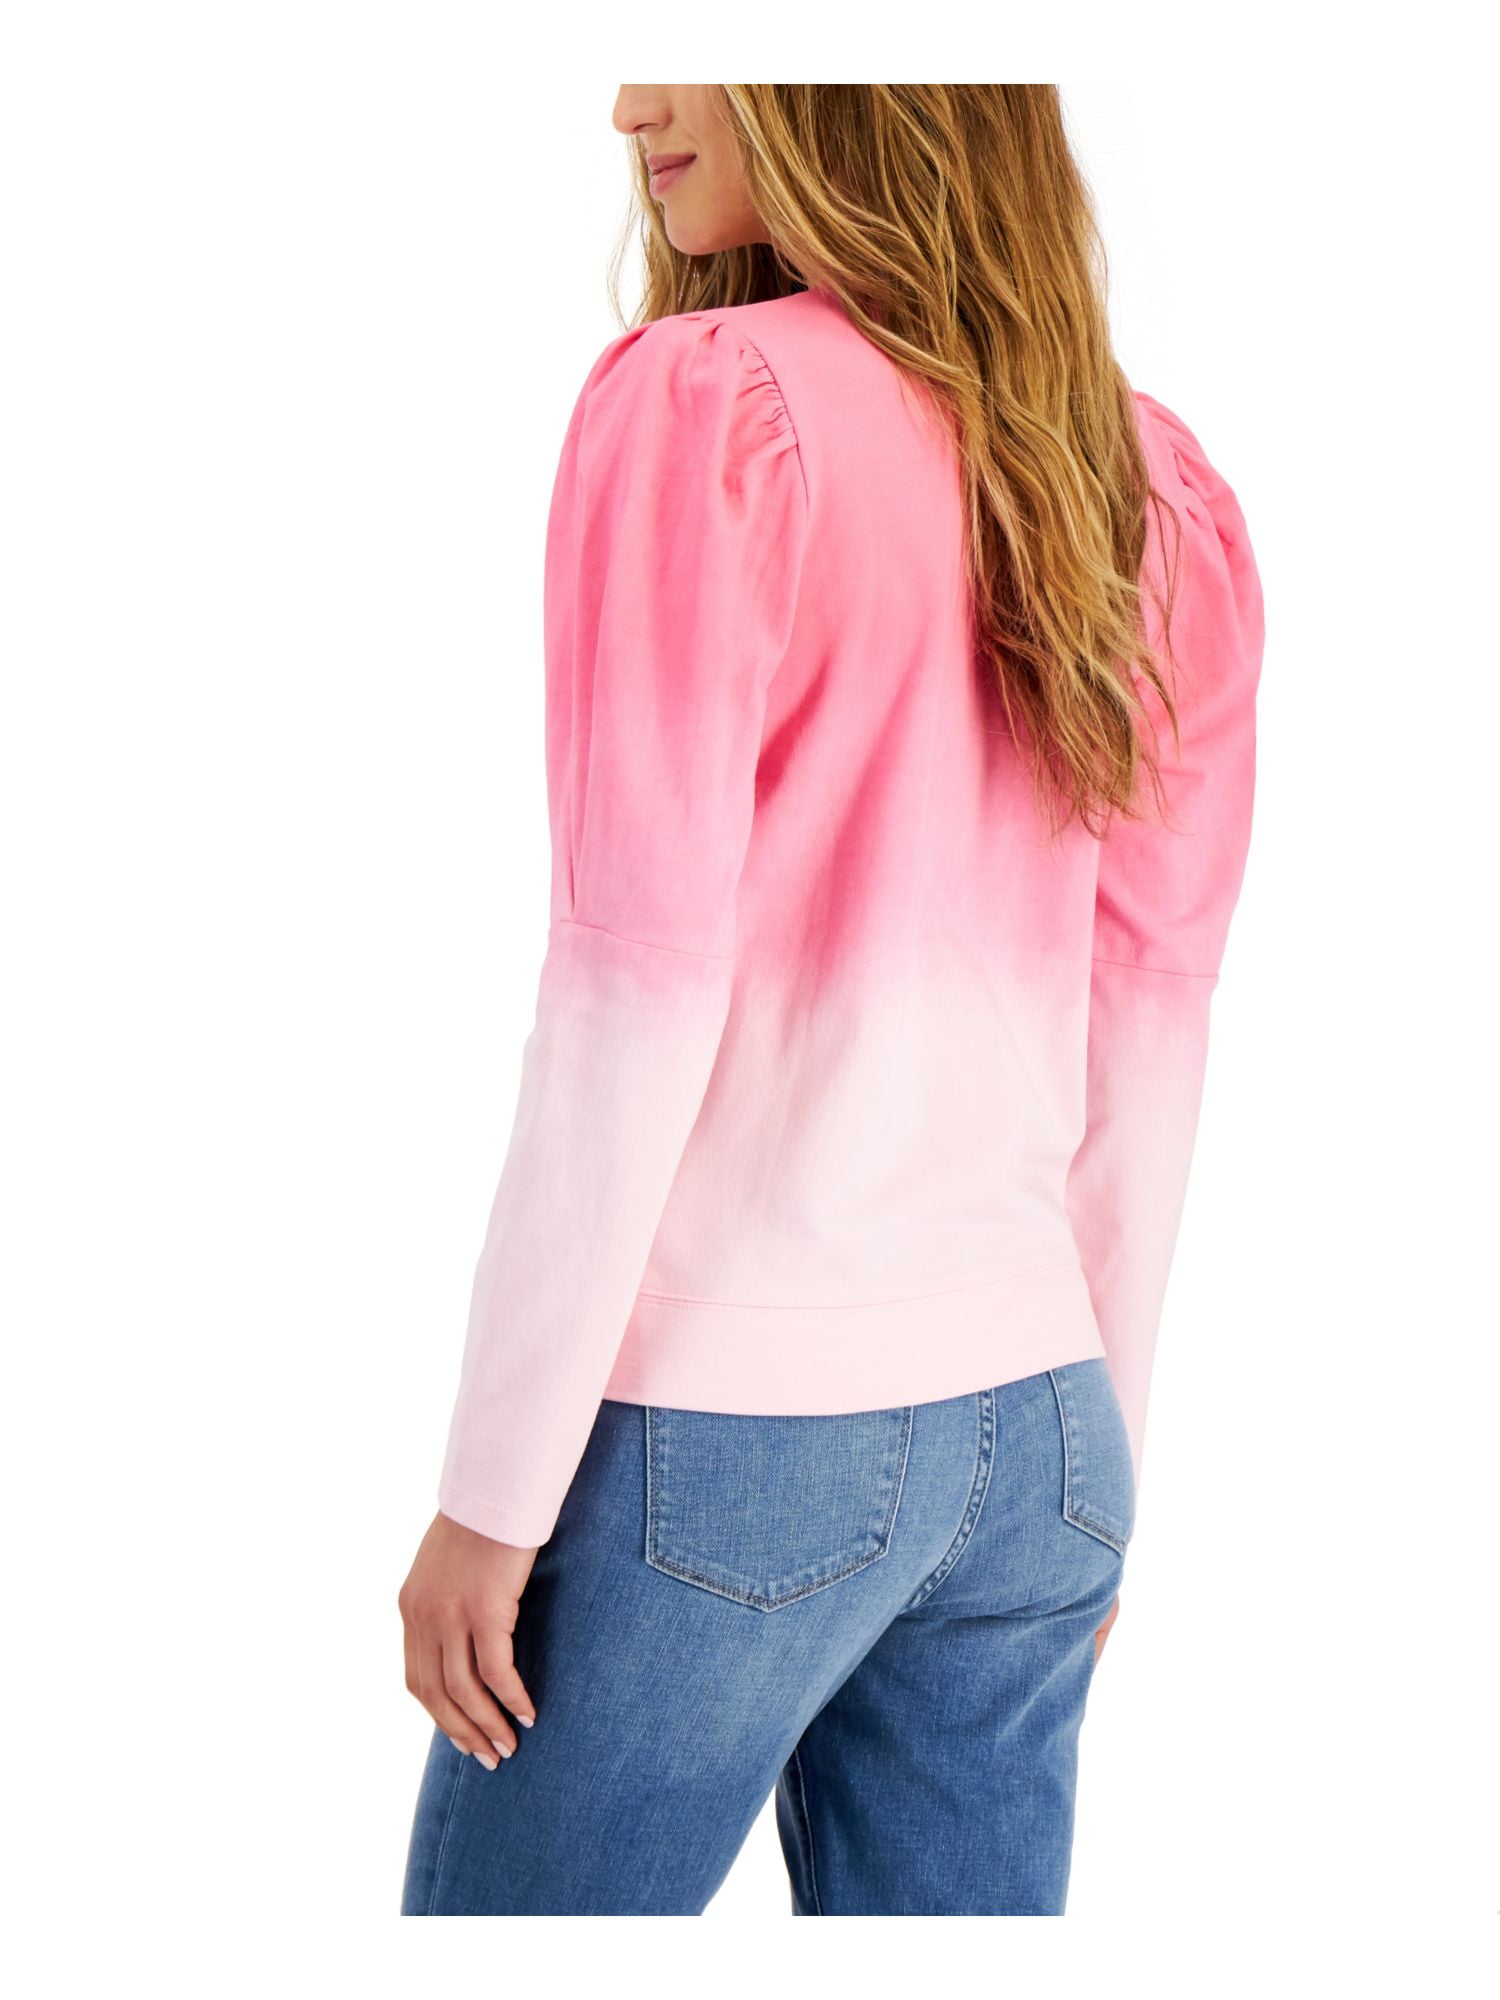 Gathered Ombre Pink Top HILFIGER S Neck Sleeve Ribbed Womens TOMMY Long V